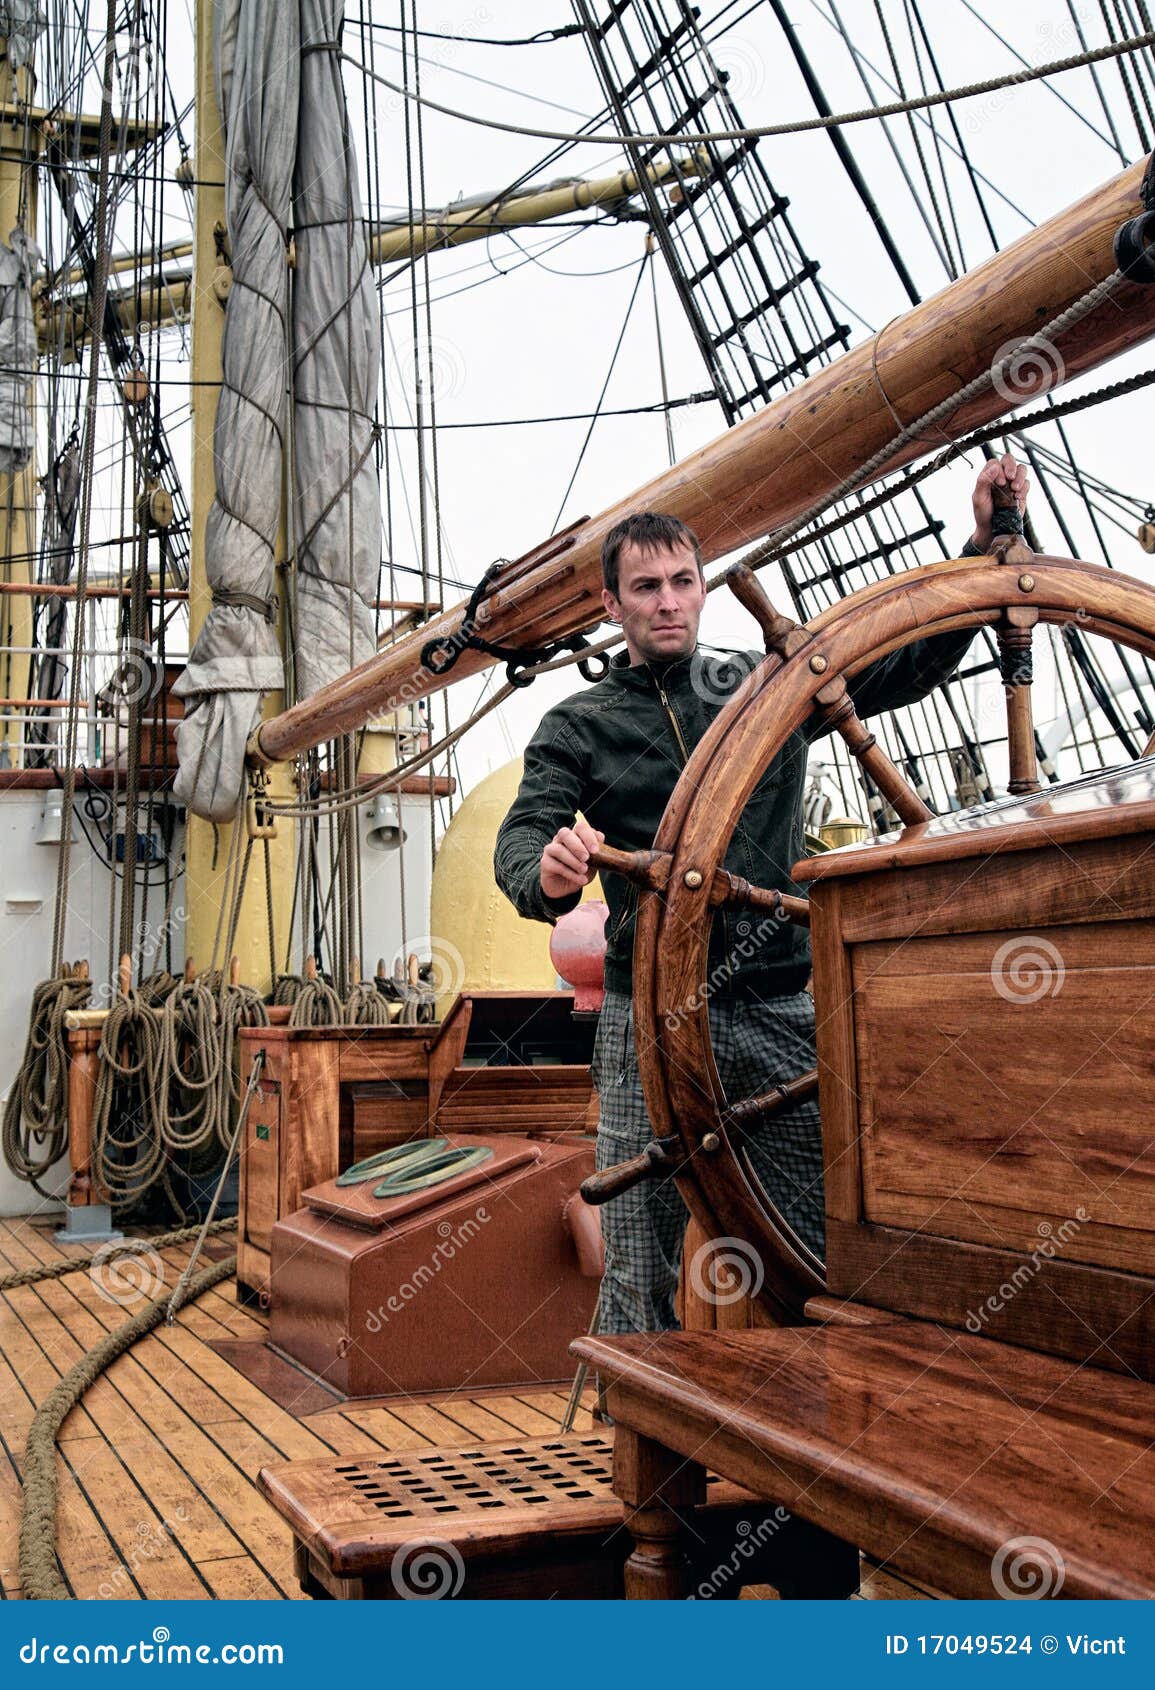 Verwachting Charles Keasing Interactie Man at the helm stock photo. Image of sailor, outdoors - 17049524